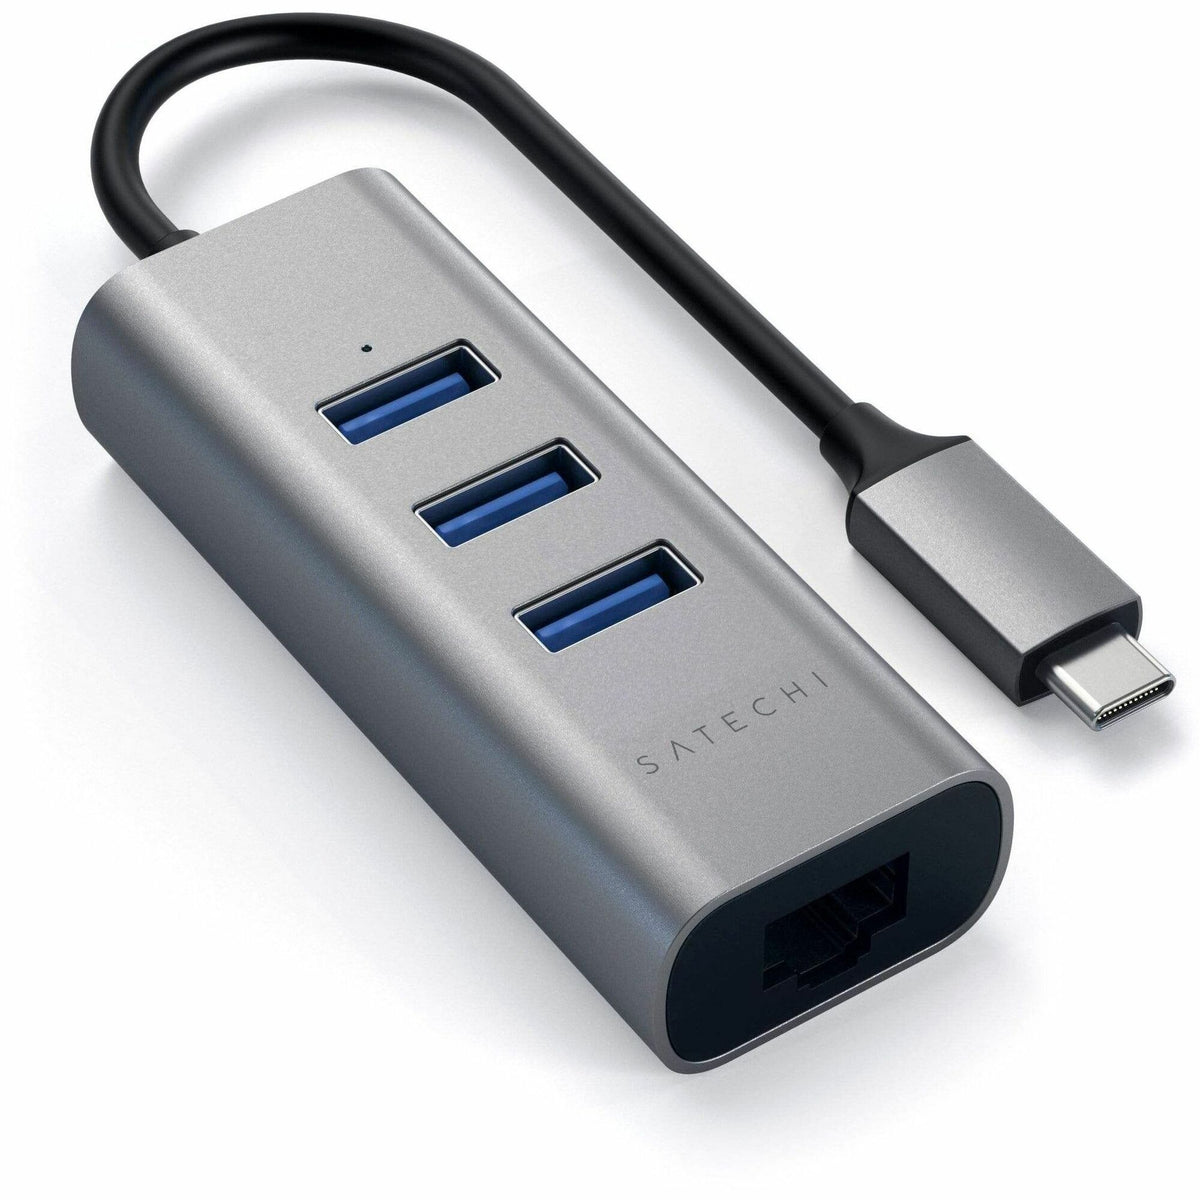 Satechi Type-C 2-in-1 USB Hub with Ethernet - ST-TC2N1USB31AM